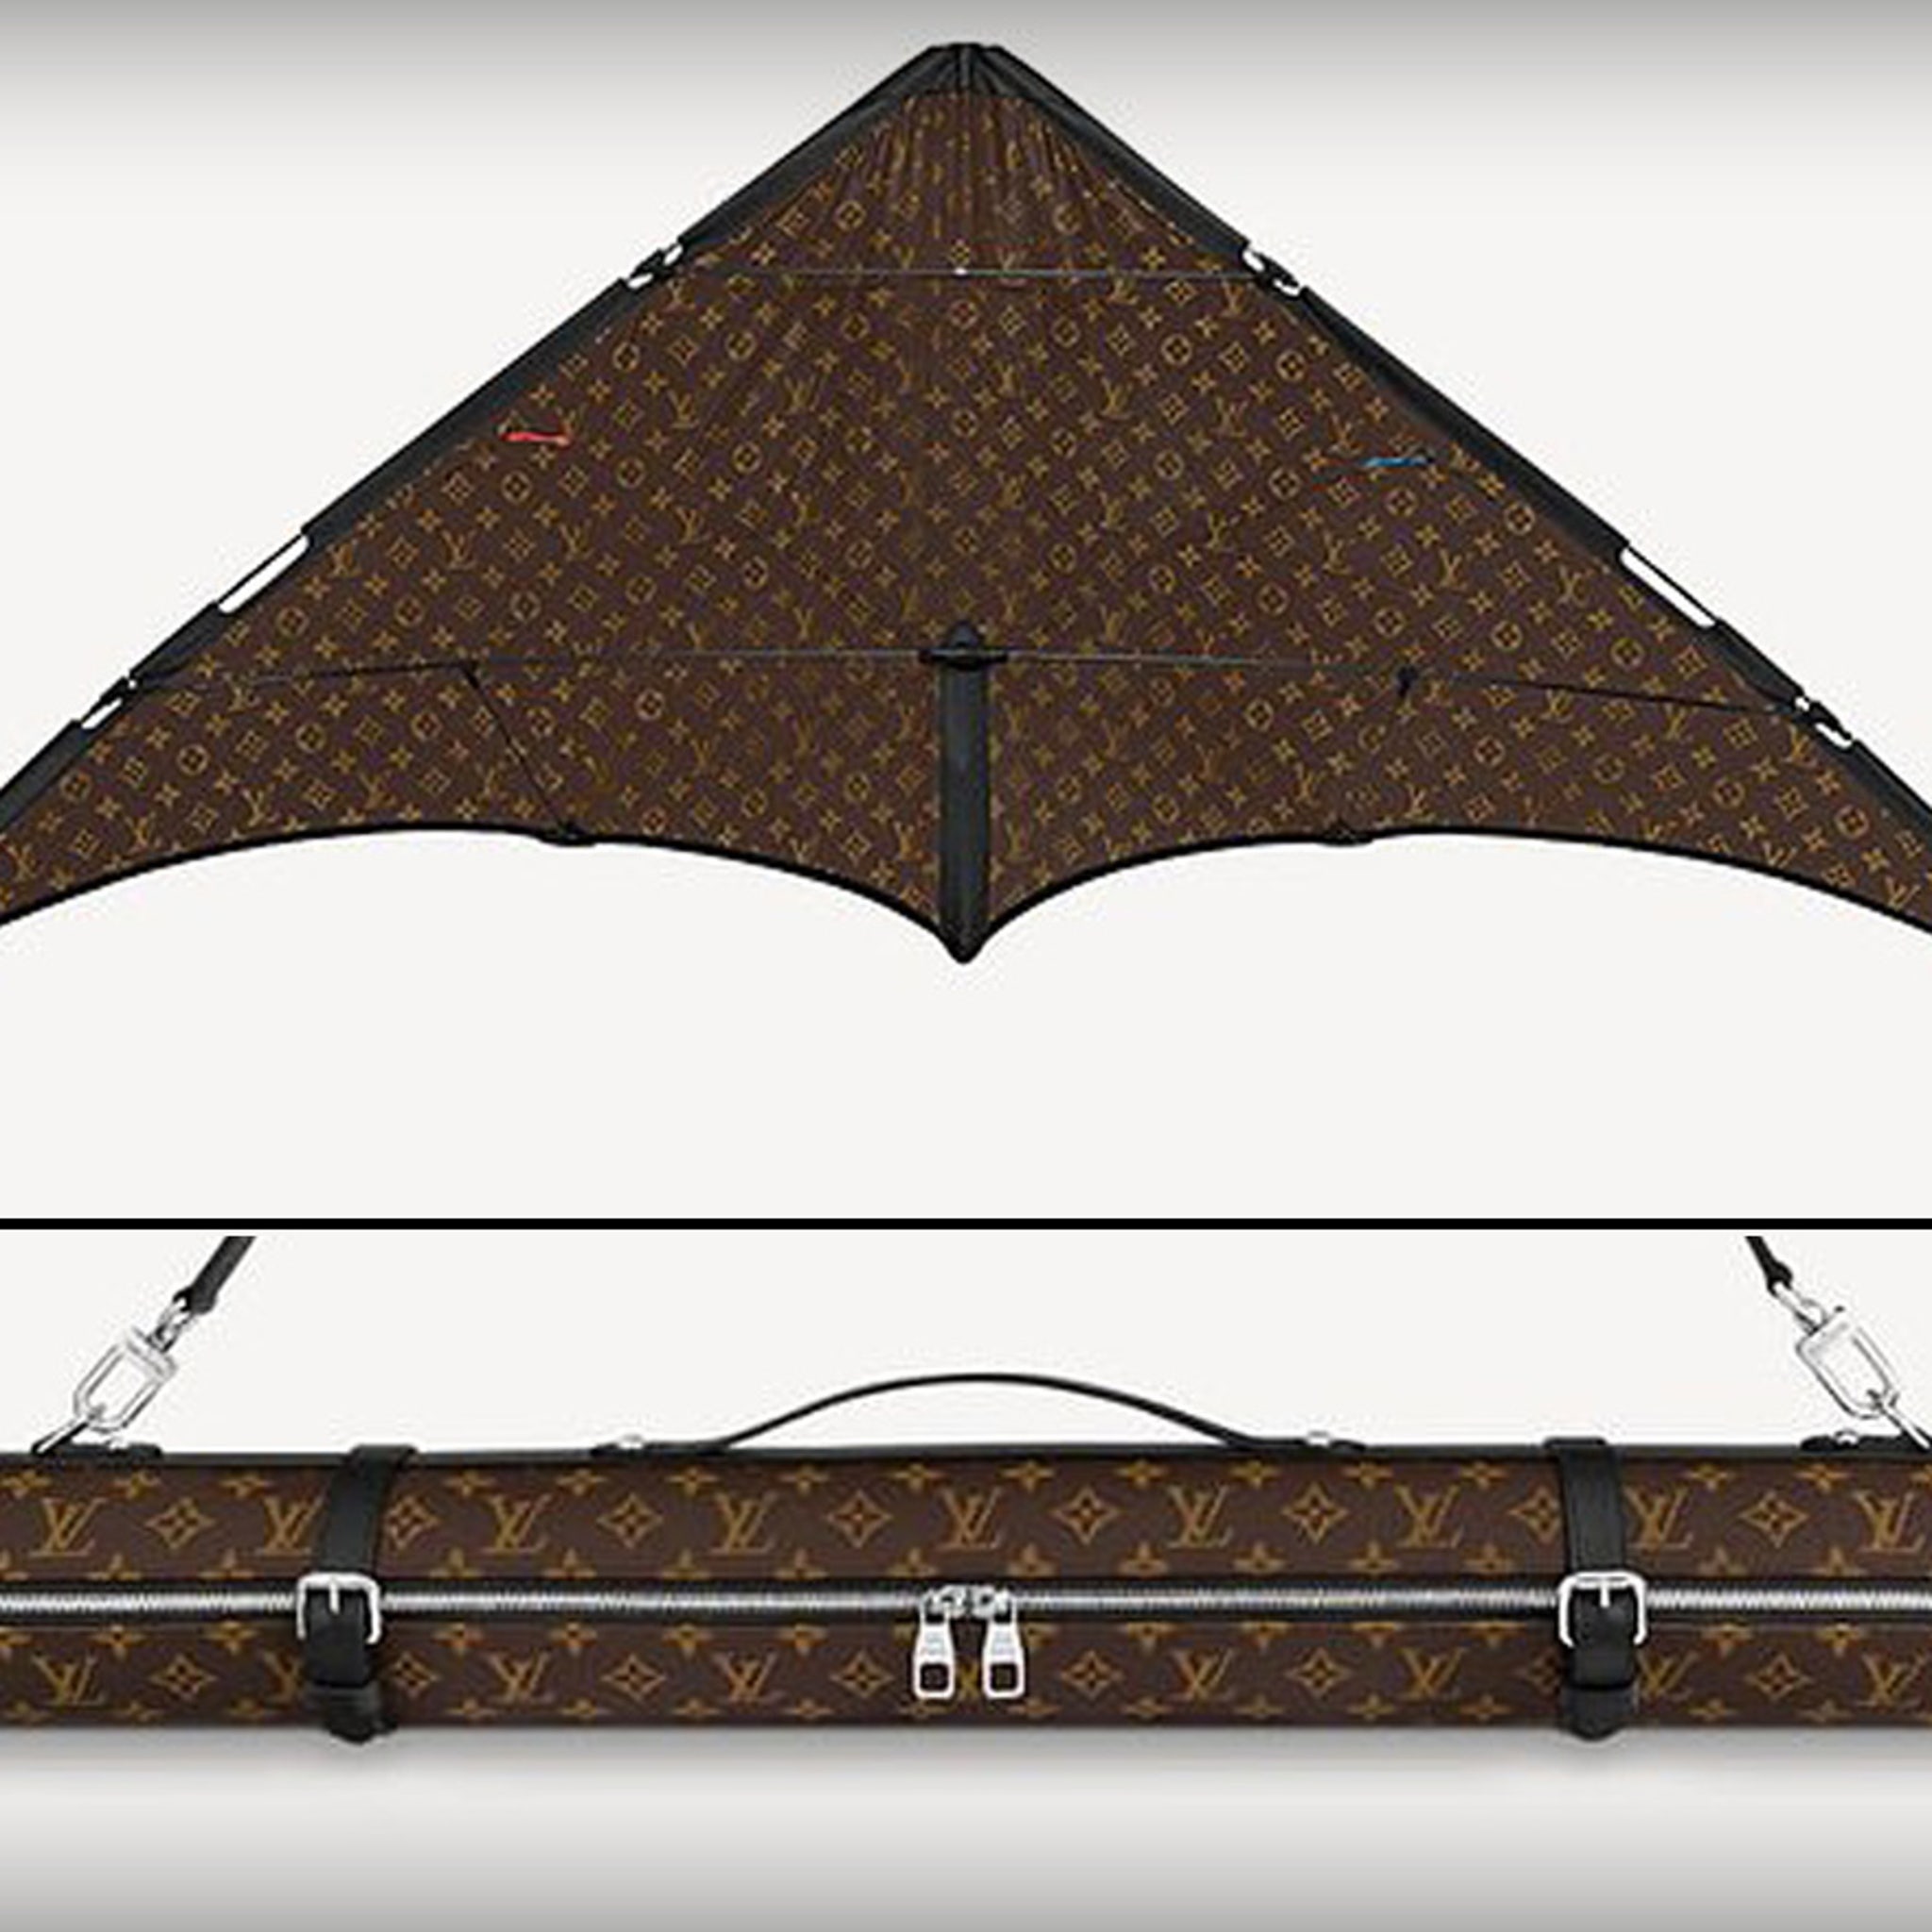 TikTok roasts over-the-top Louis Vuitton kite: 'How is this a thing?